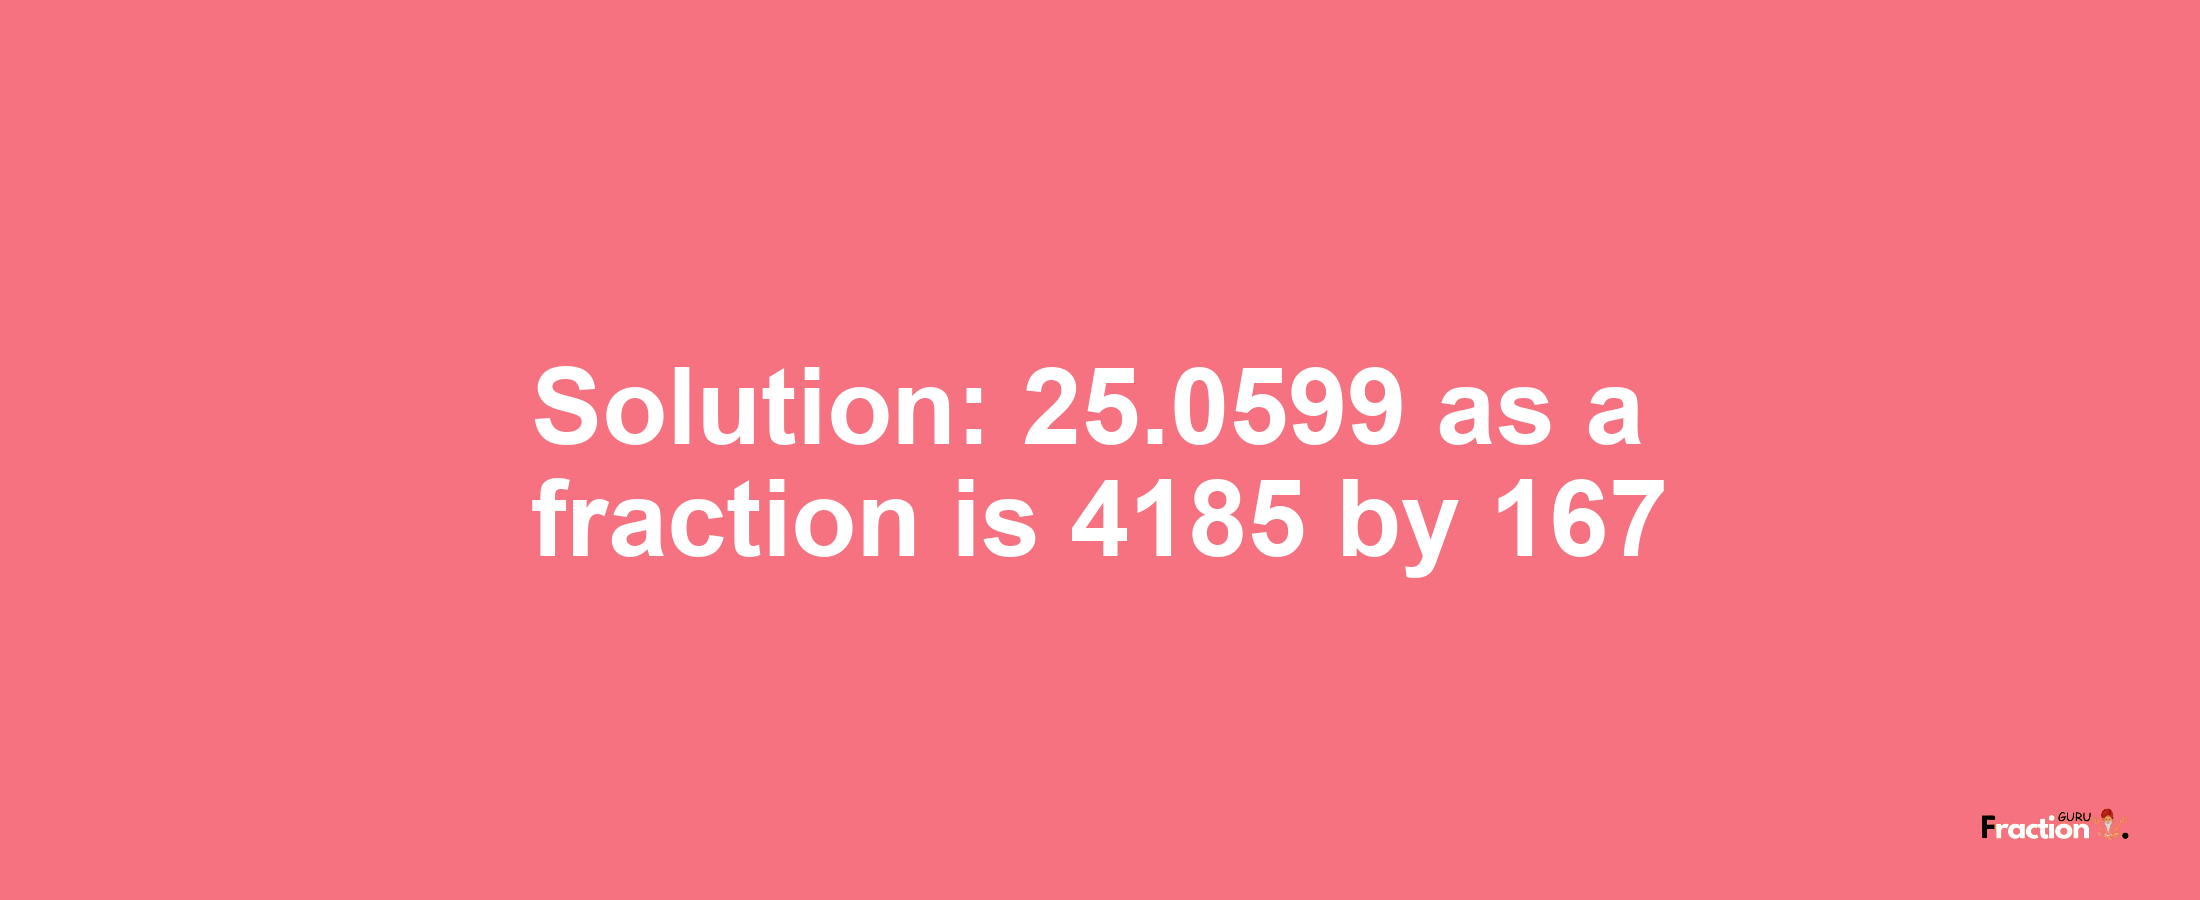 Solution:25.0599 as a fraction is 4185/167